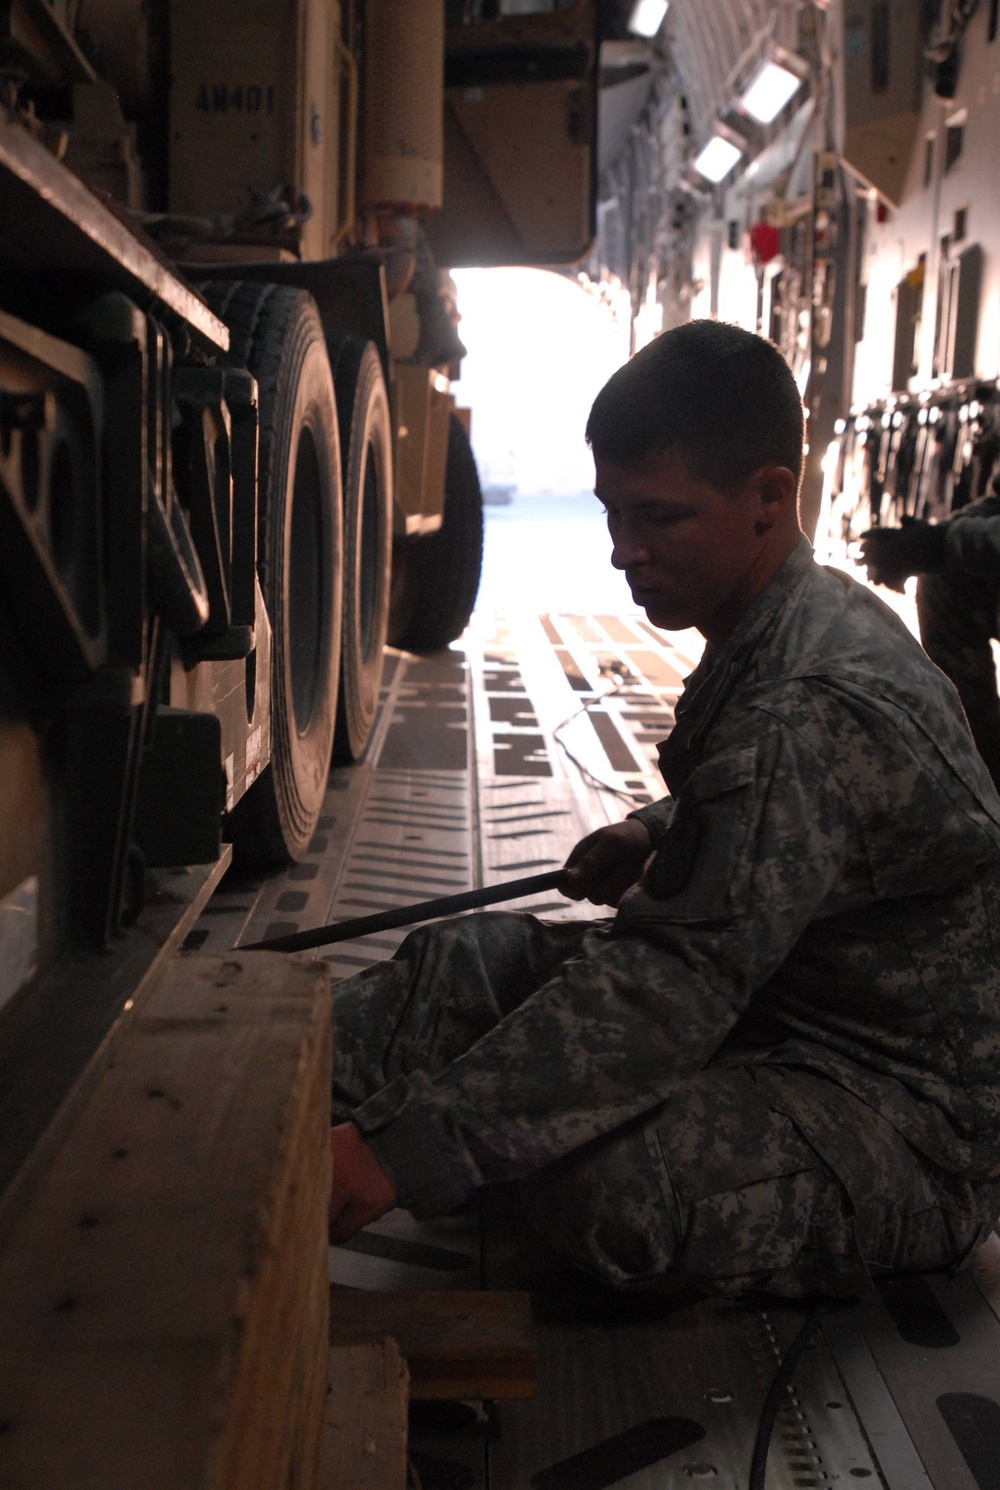 371st soldiers conduct cargo operations for Southwest Asia